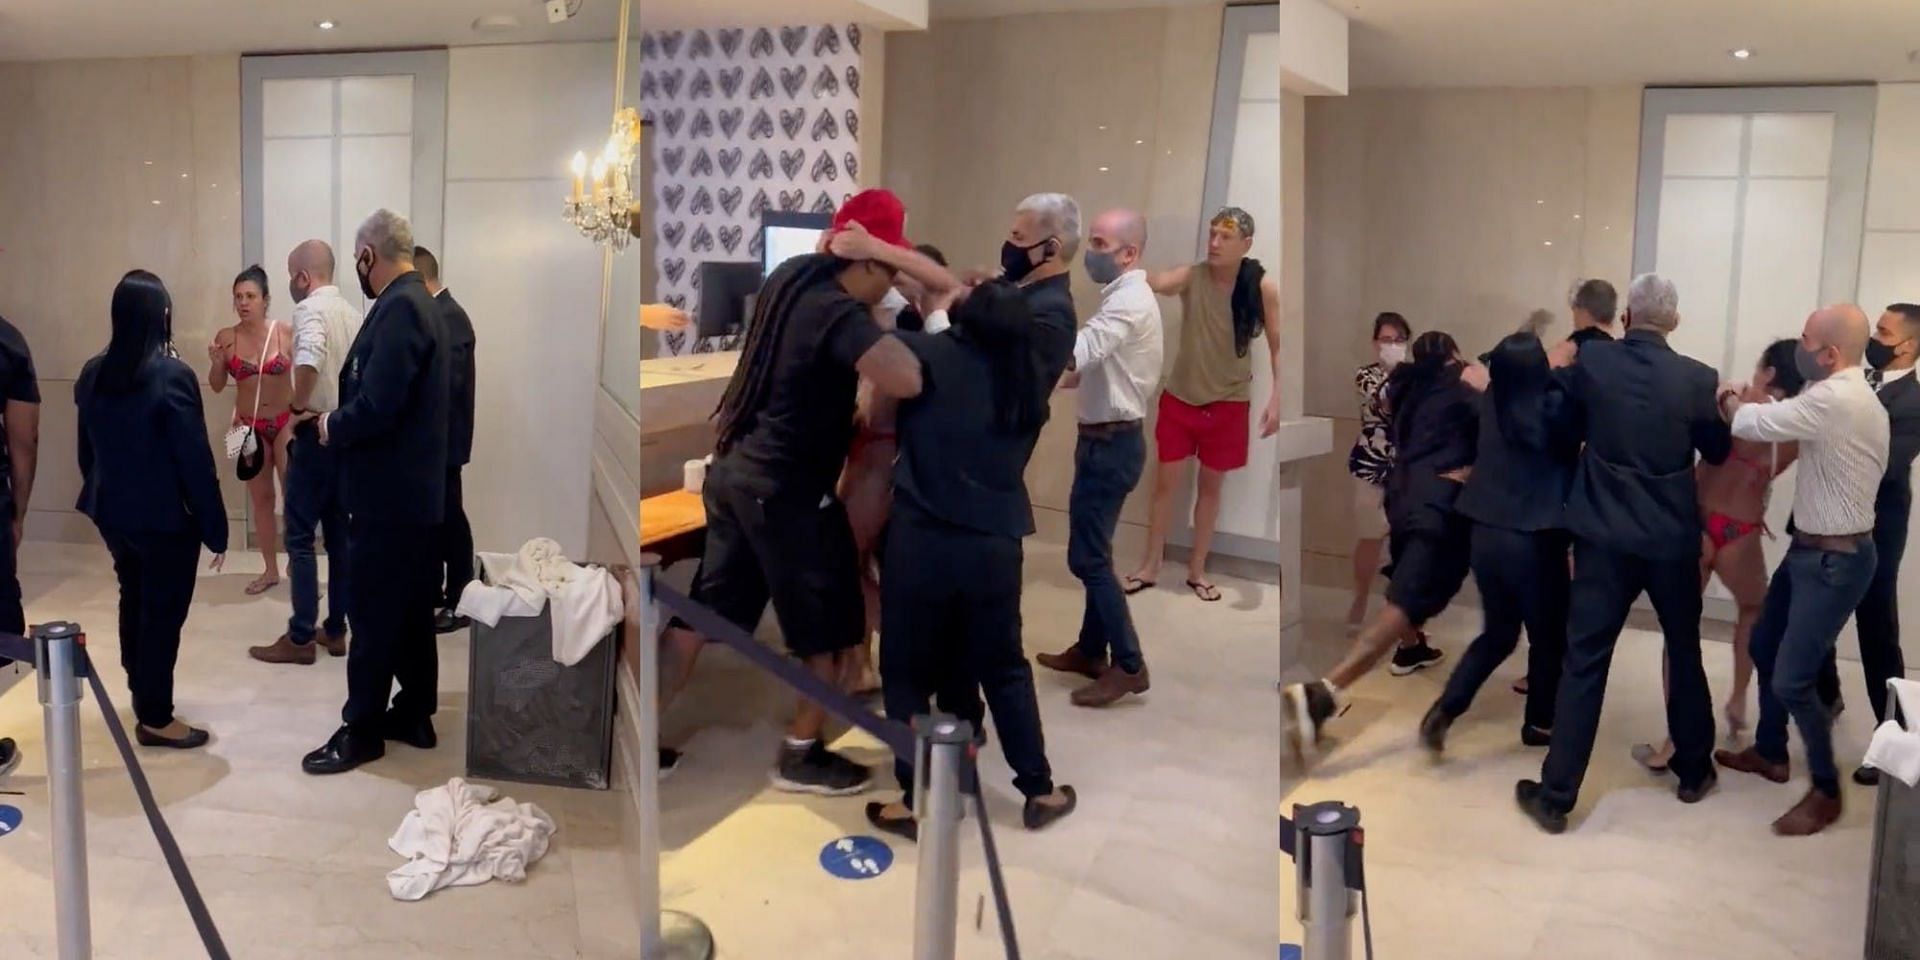 Video of a woman attacking a man at a Hilton hotel has gone viral on Twitter (Image via monty_sexton/Twitter)